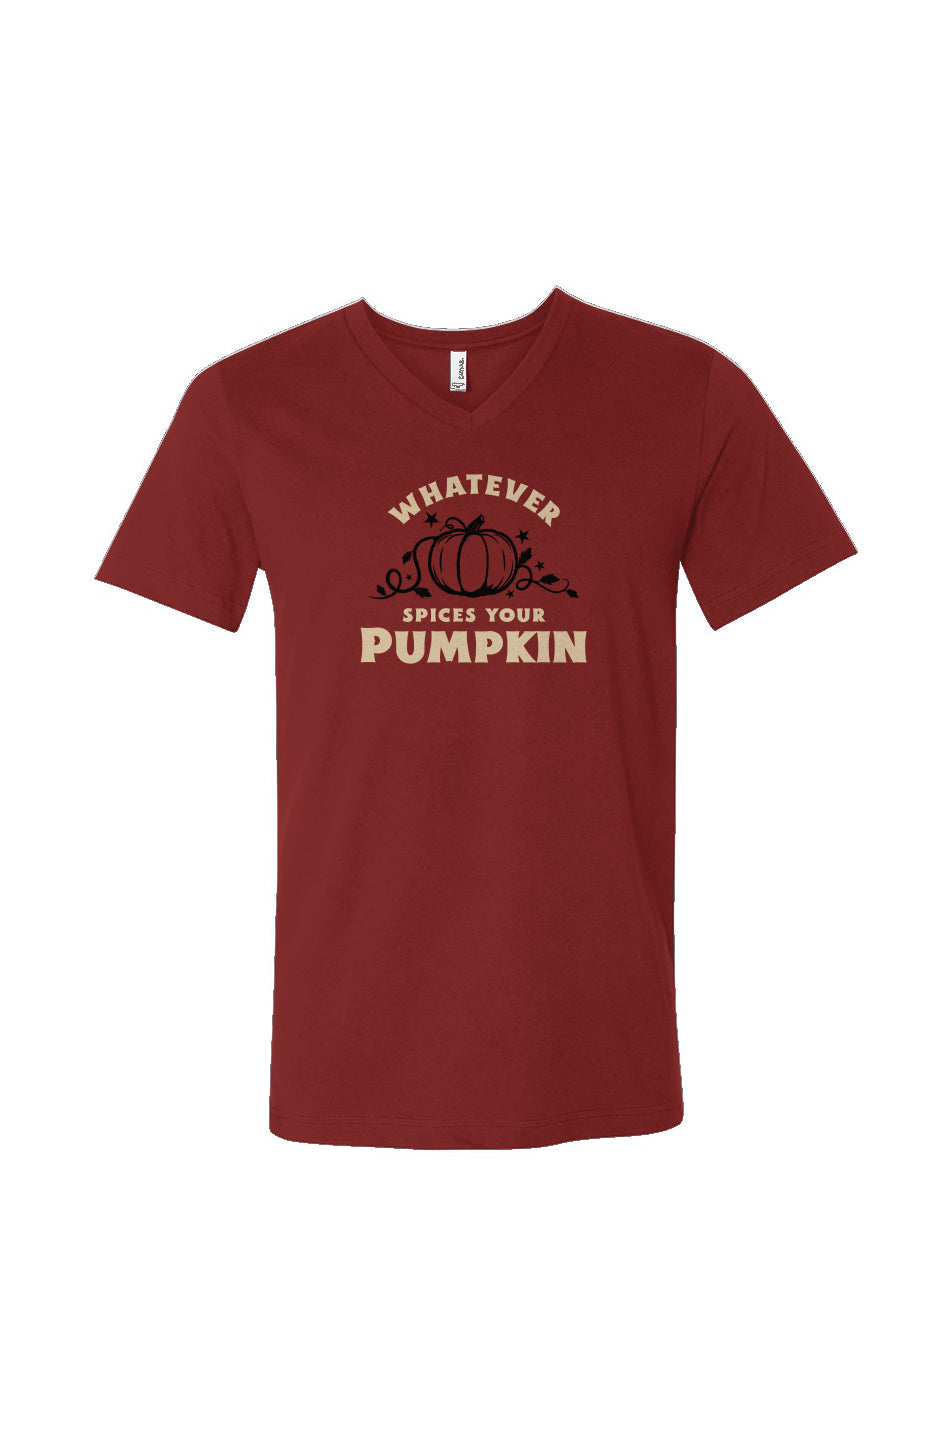 "Whatever Spices your Pumpkin" Unisex Fit